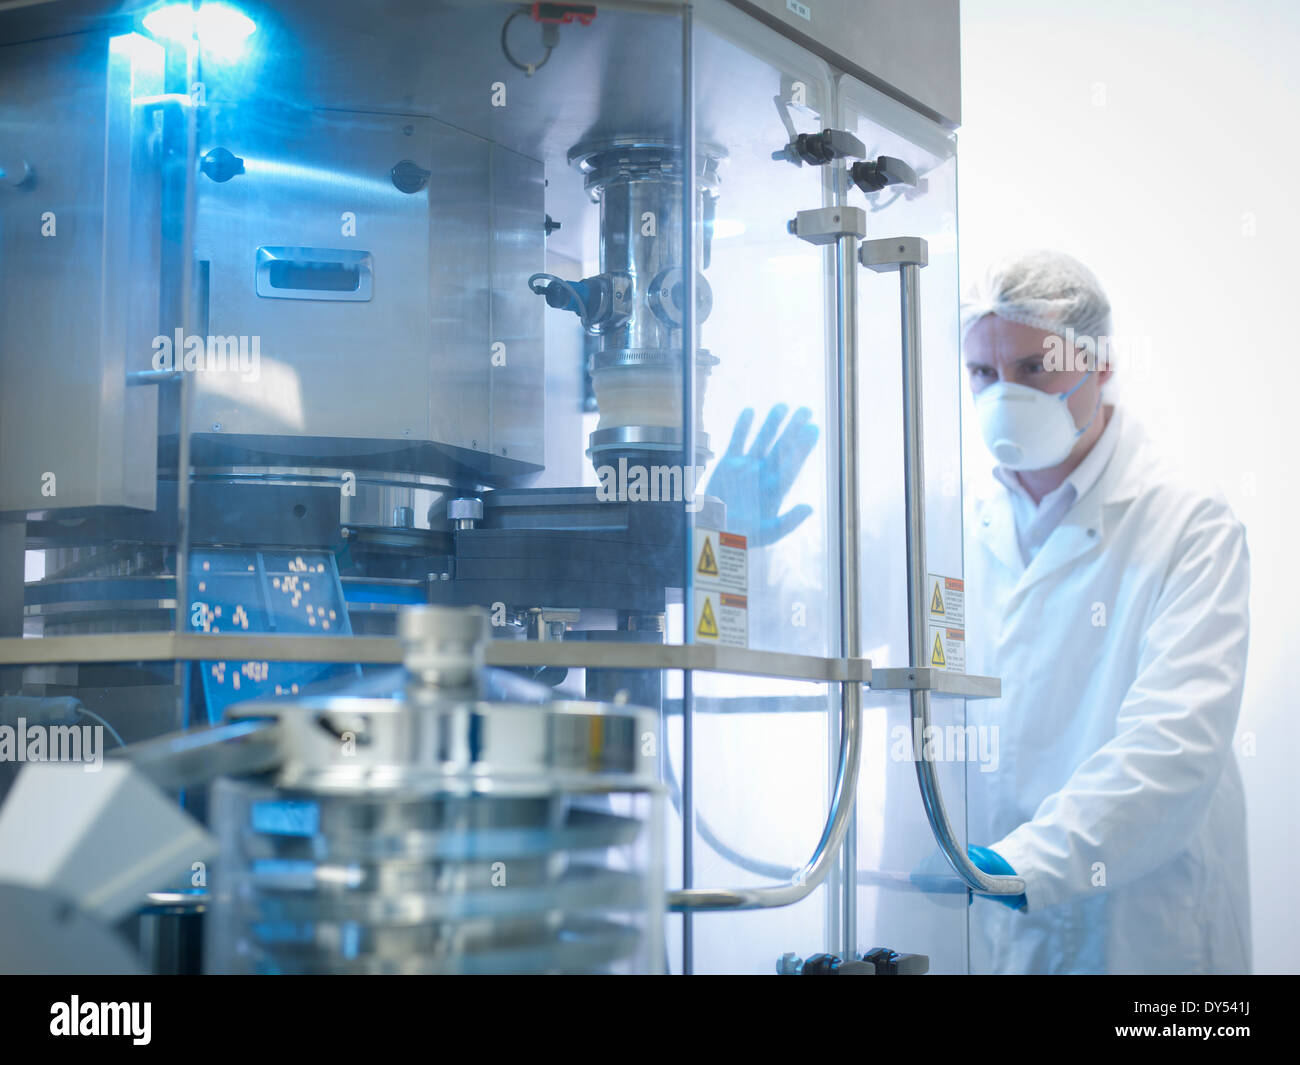 Worker with tablet pressing machine in pharmaceutical factory Stock Photo